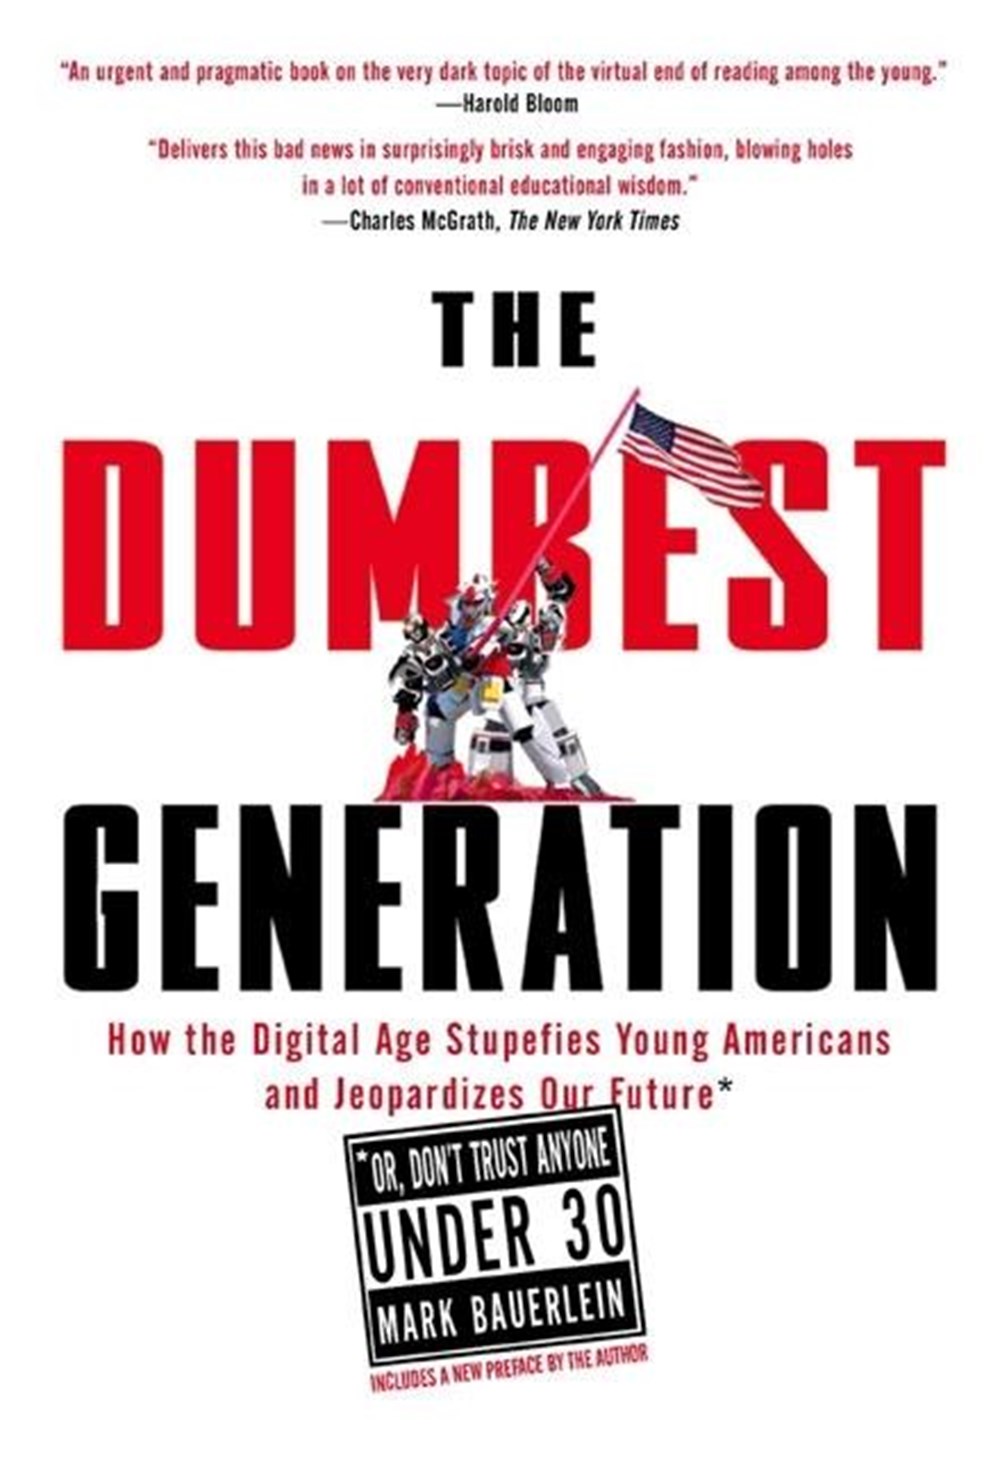 Dumbest Generation How the Digital Age Stupefies Young Americans and Jeopardizes Our Future(or, Don 